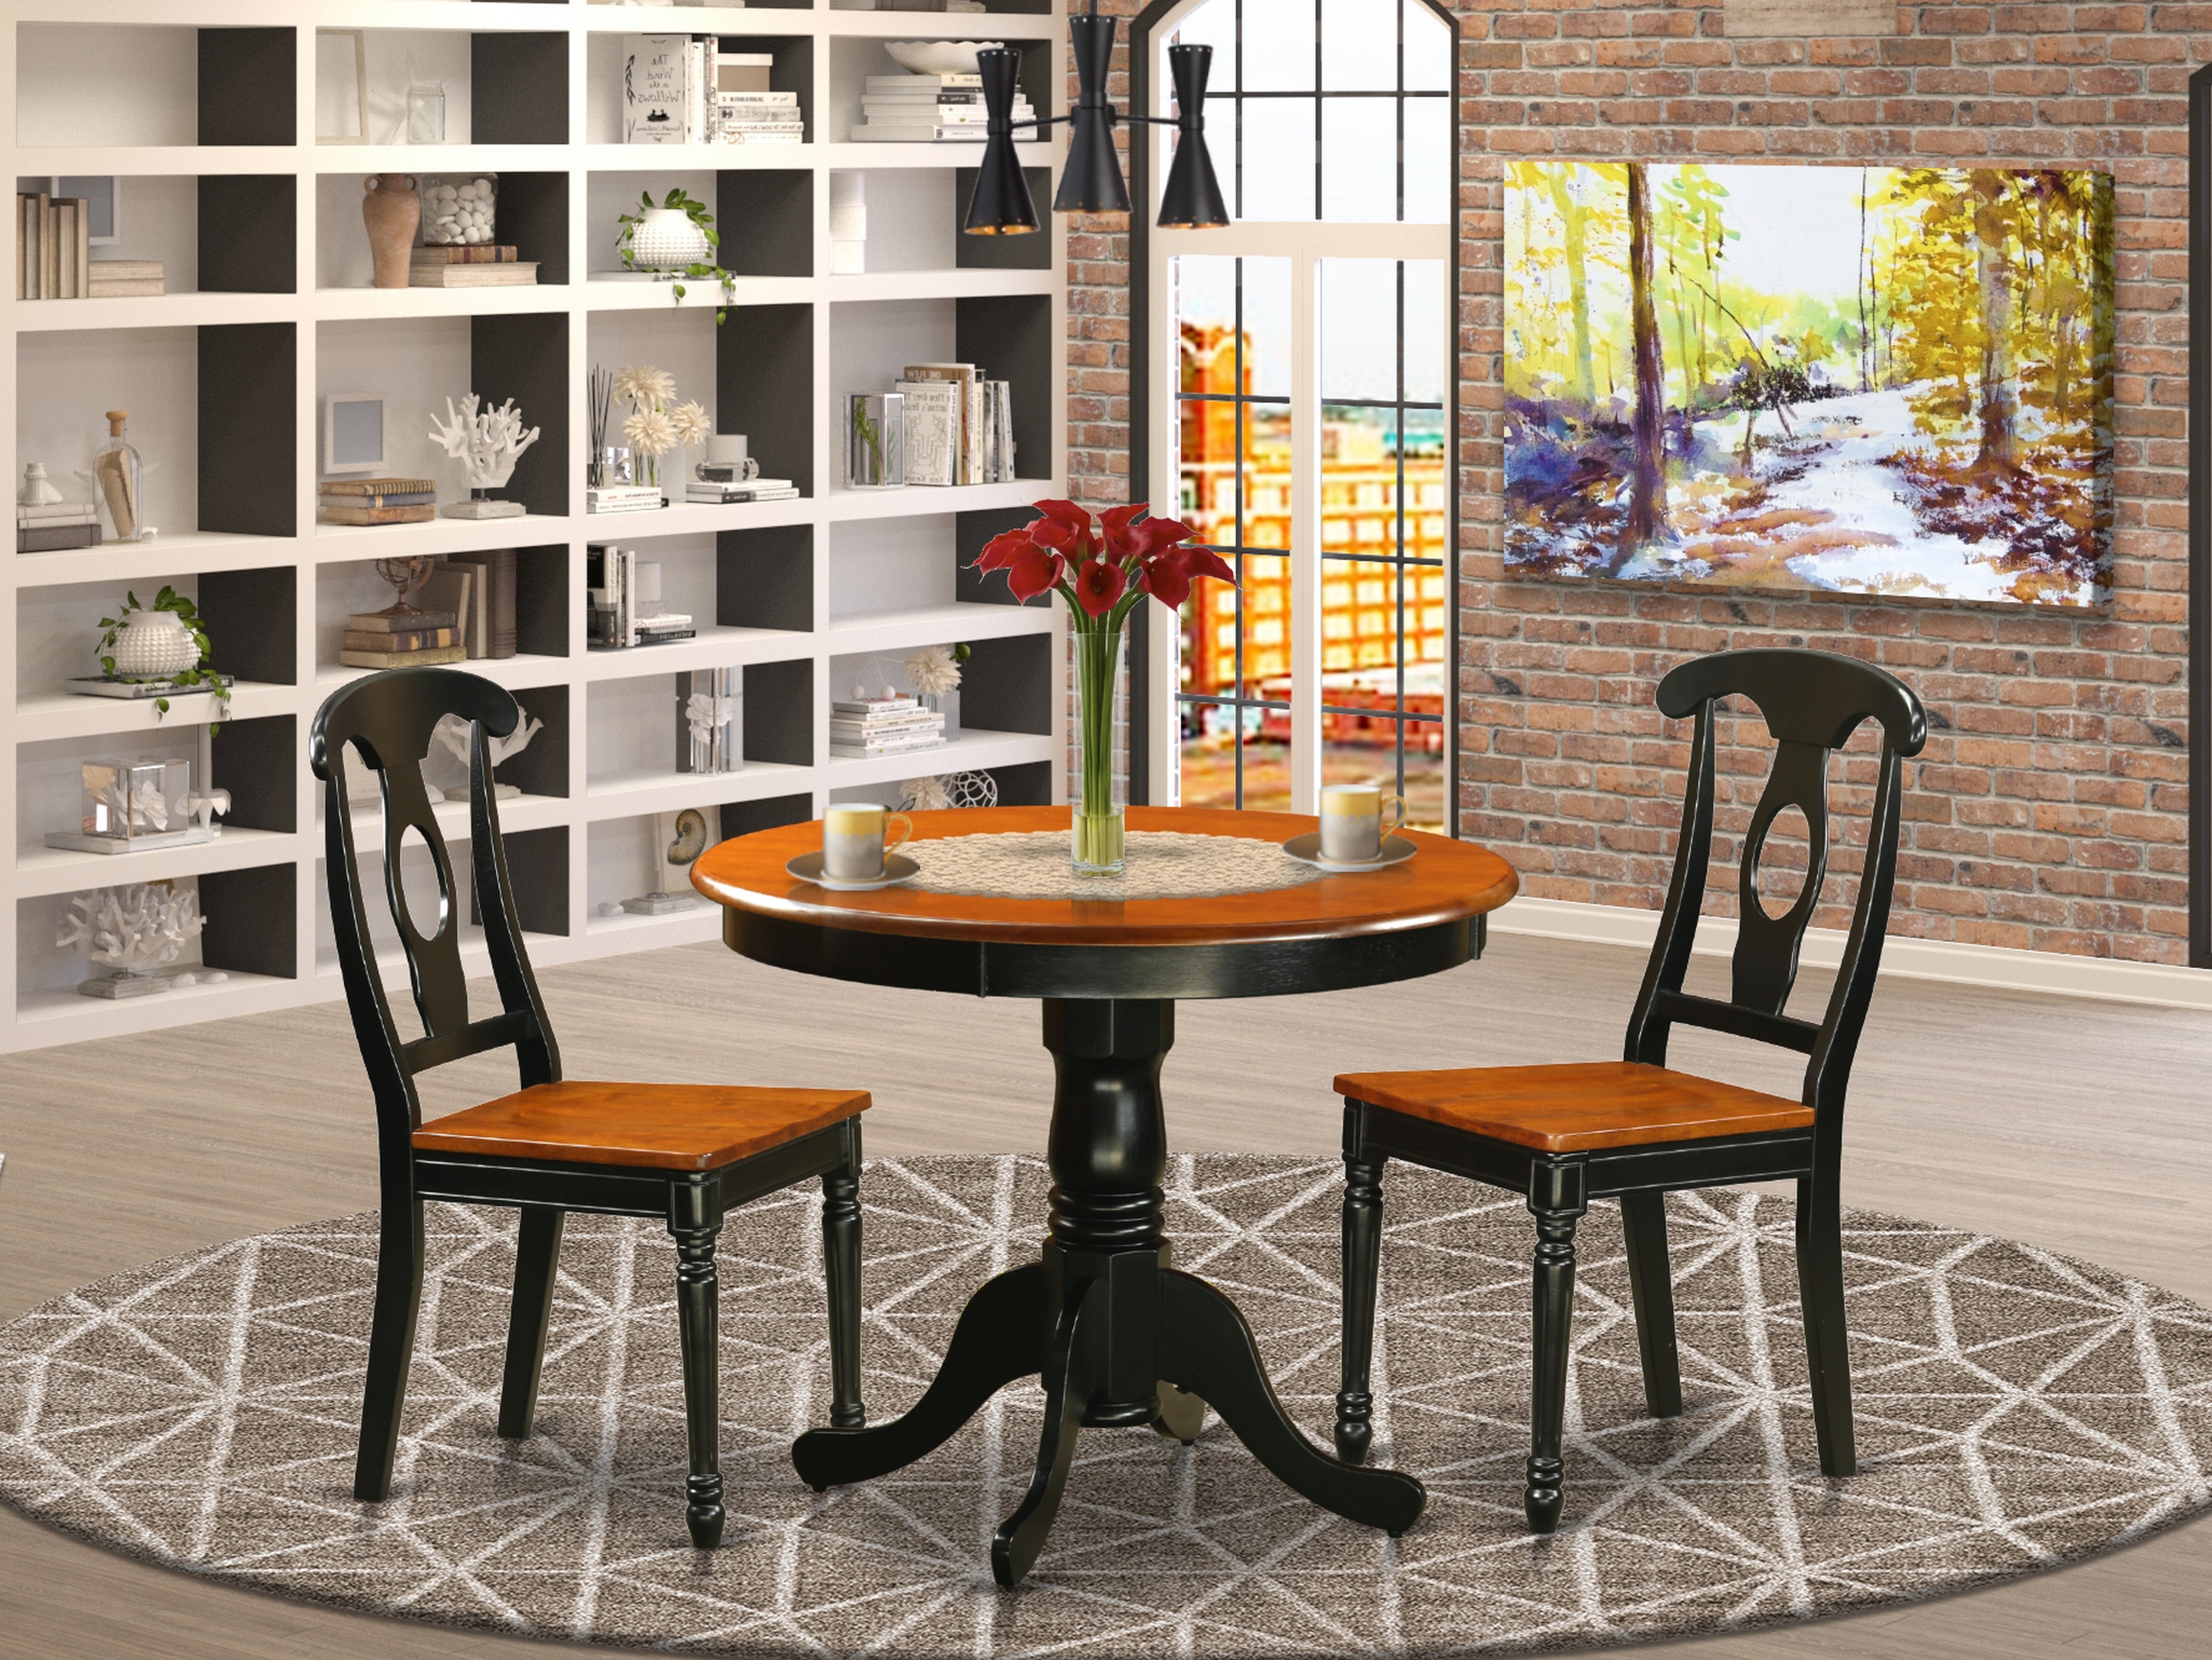 ANKE3-BLK-W Black 3 Pc Dining room setwith 2 Wood Chairs